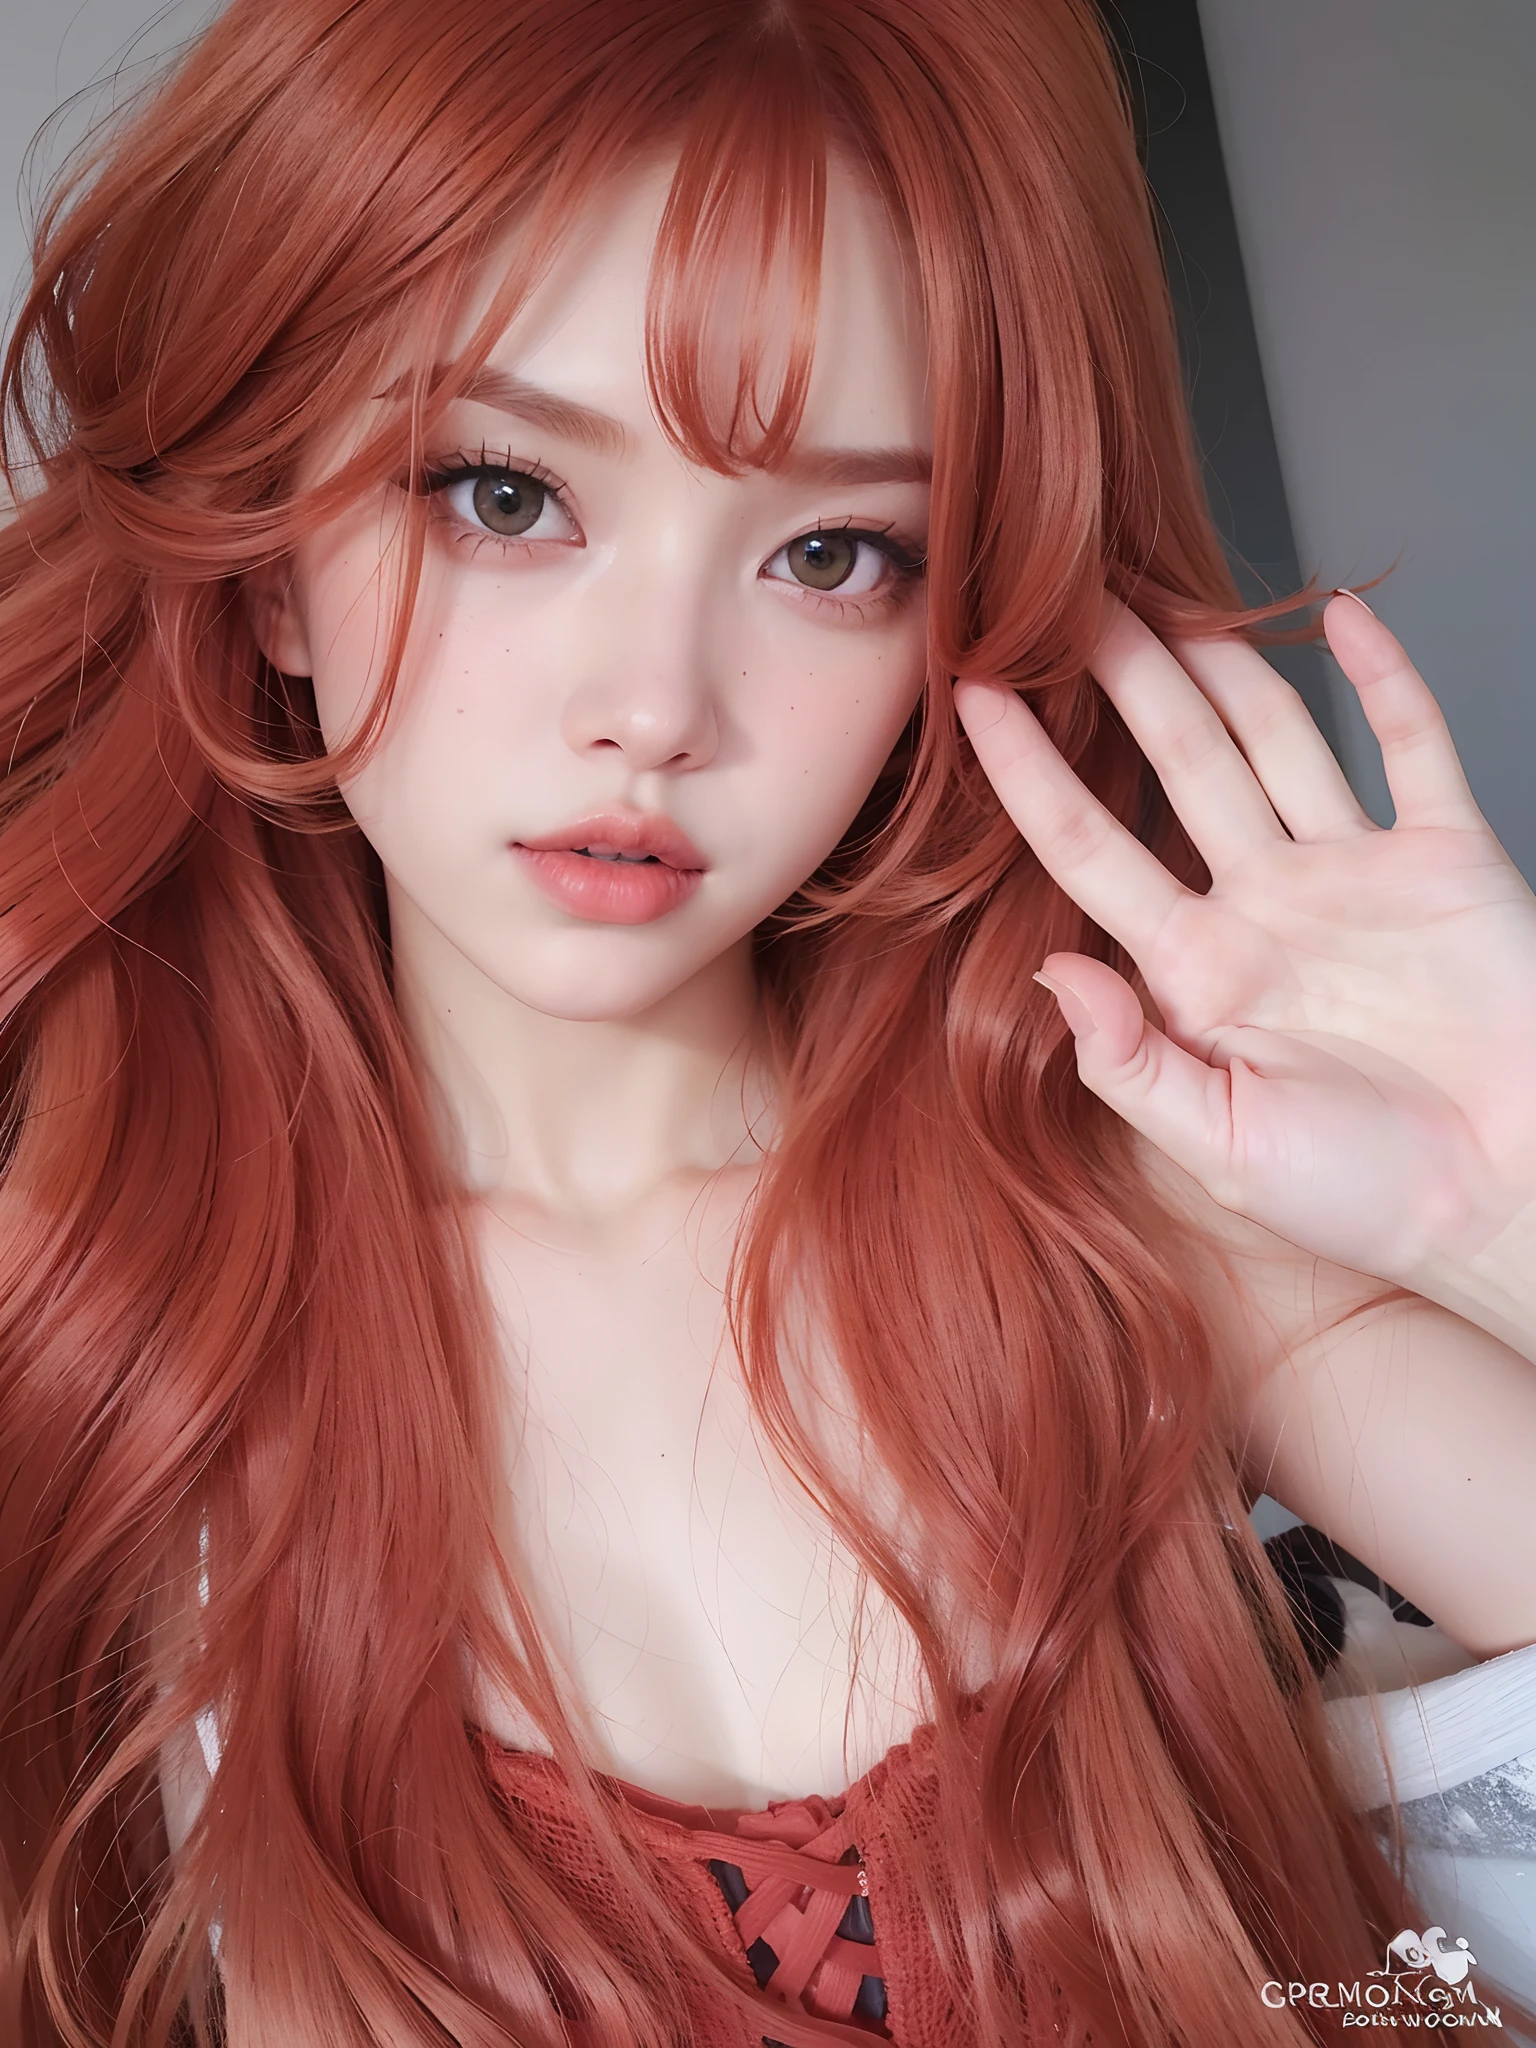 A closeup of a woman with long red hair and a bra, flowing ginger hair, ginger wavy hair, orange skin and long fiery hair, long wavy orange hair, ginger  hair, orange flowing hair, glowing orange hair, long orange hair, wavy big red hair, long ginger hair, orange hair, curly copper colored hair, ginger  hair selvagem, medium long wavy ginger hair, casual wear